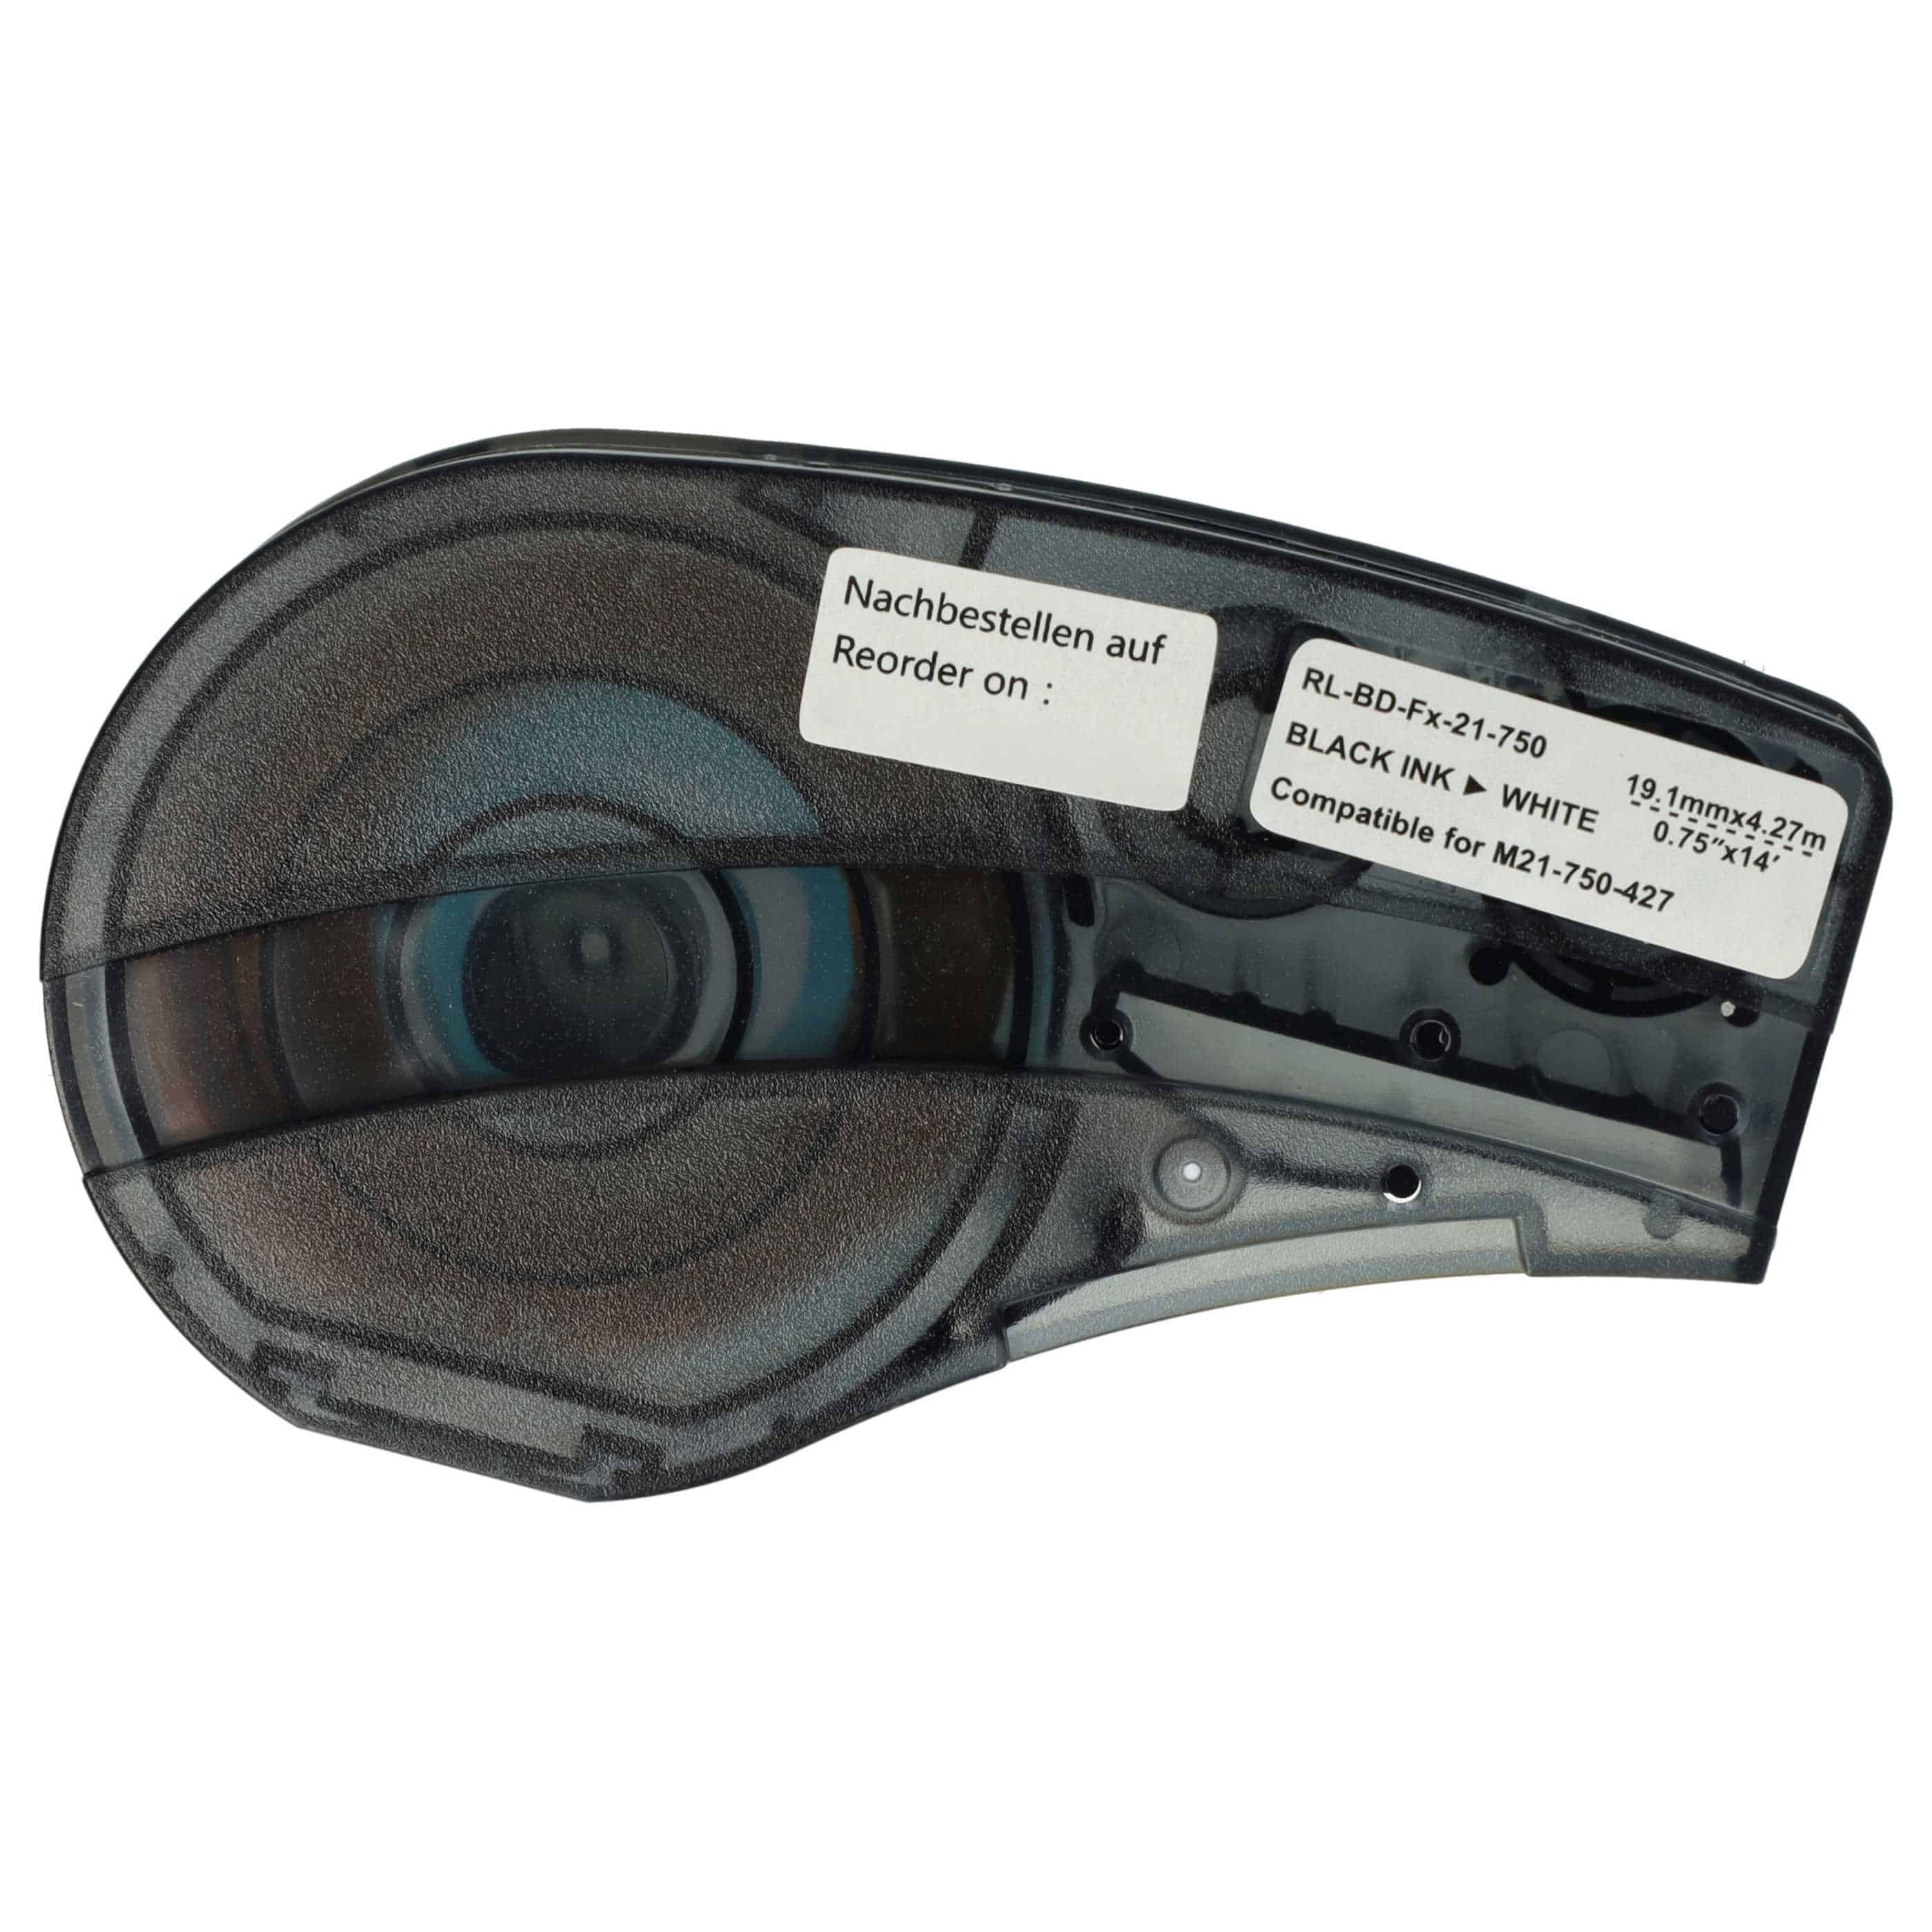 Label Tape as Replacement for Brady M21-750-427 - 19.05 mm Black to White, Vinyl